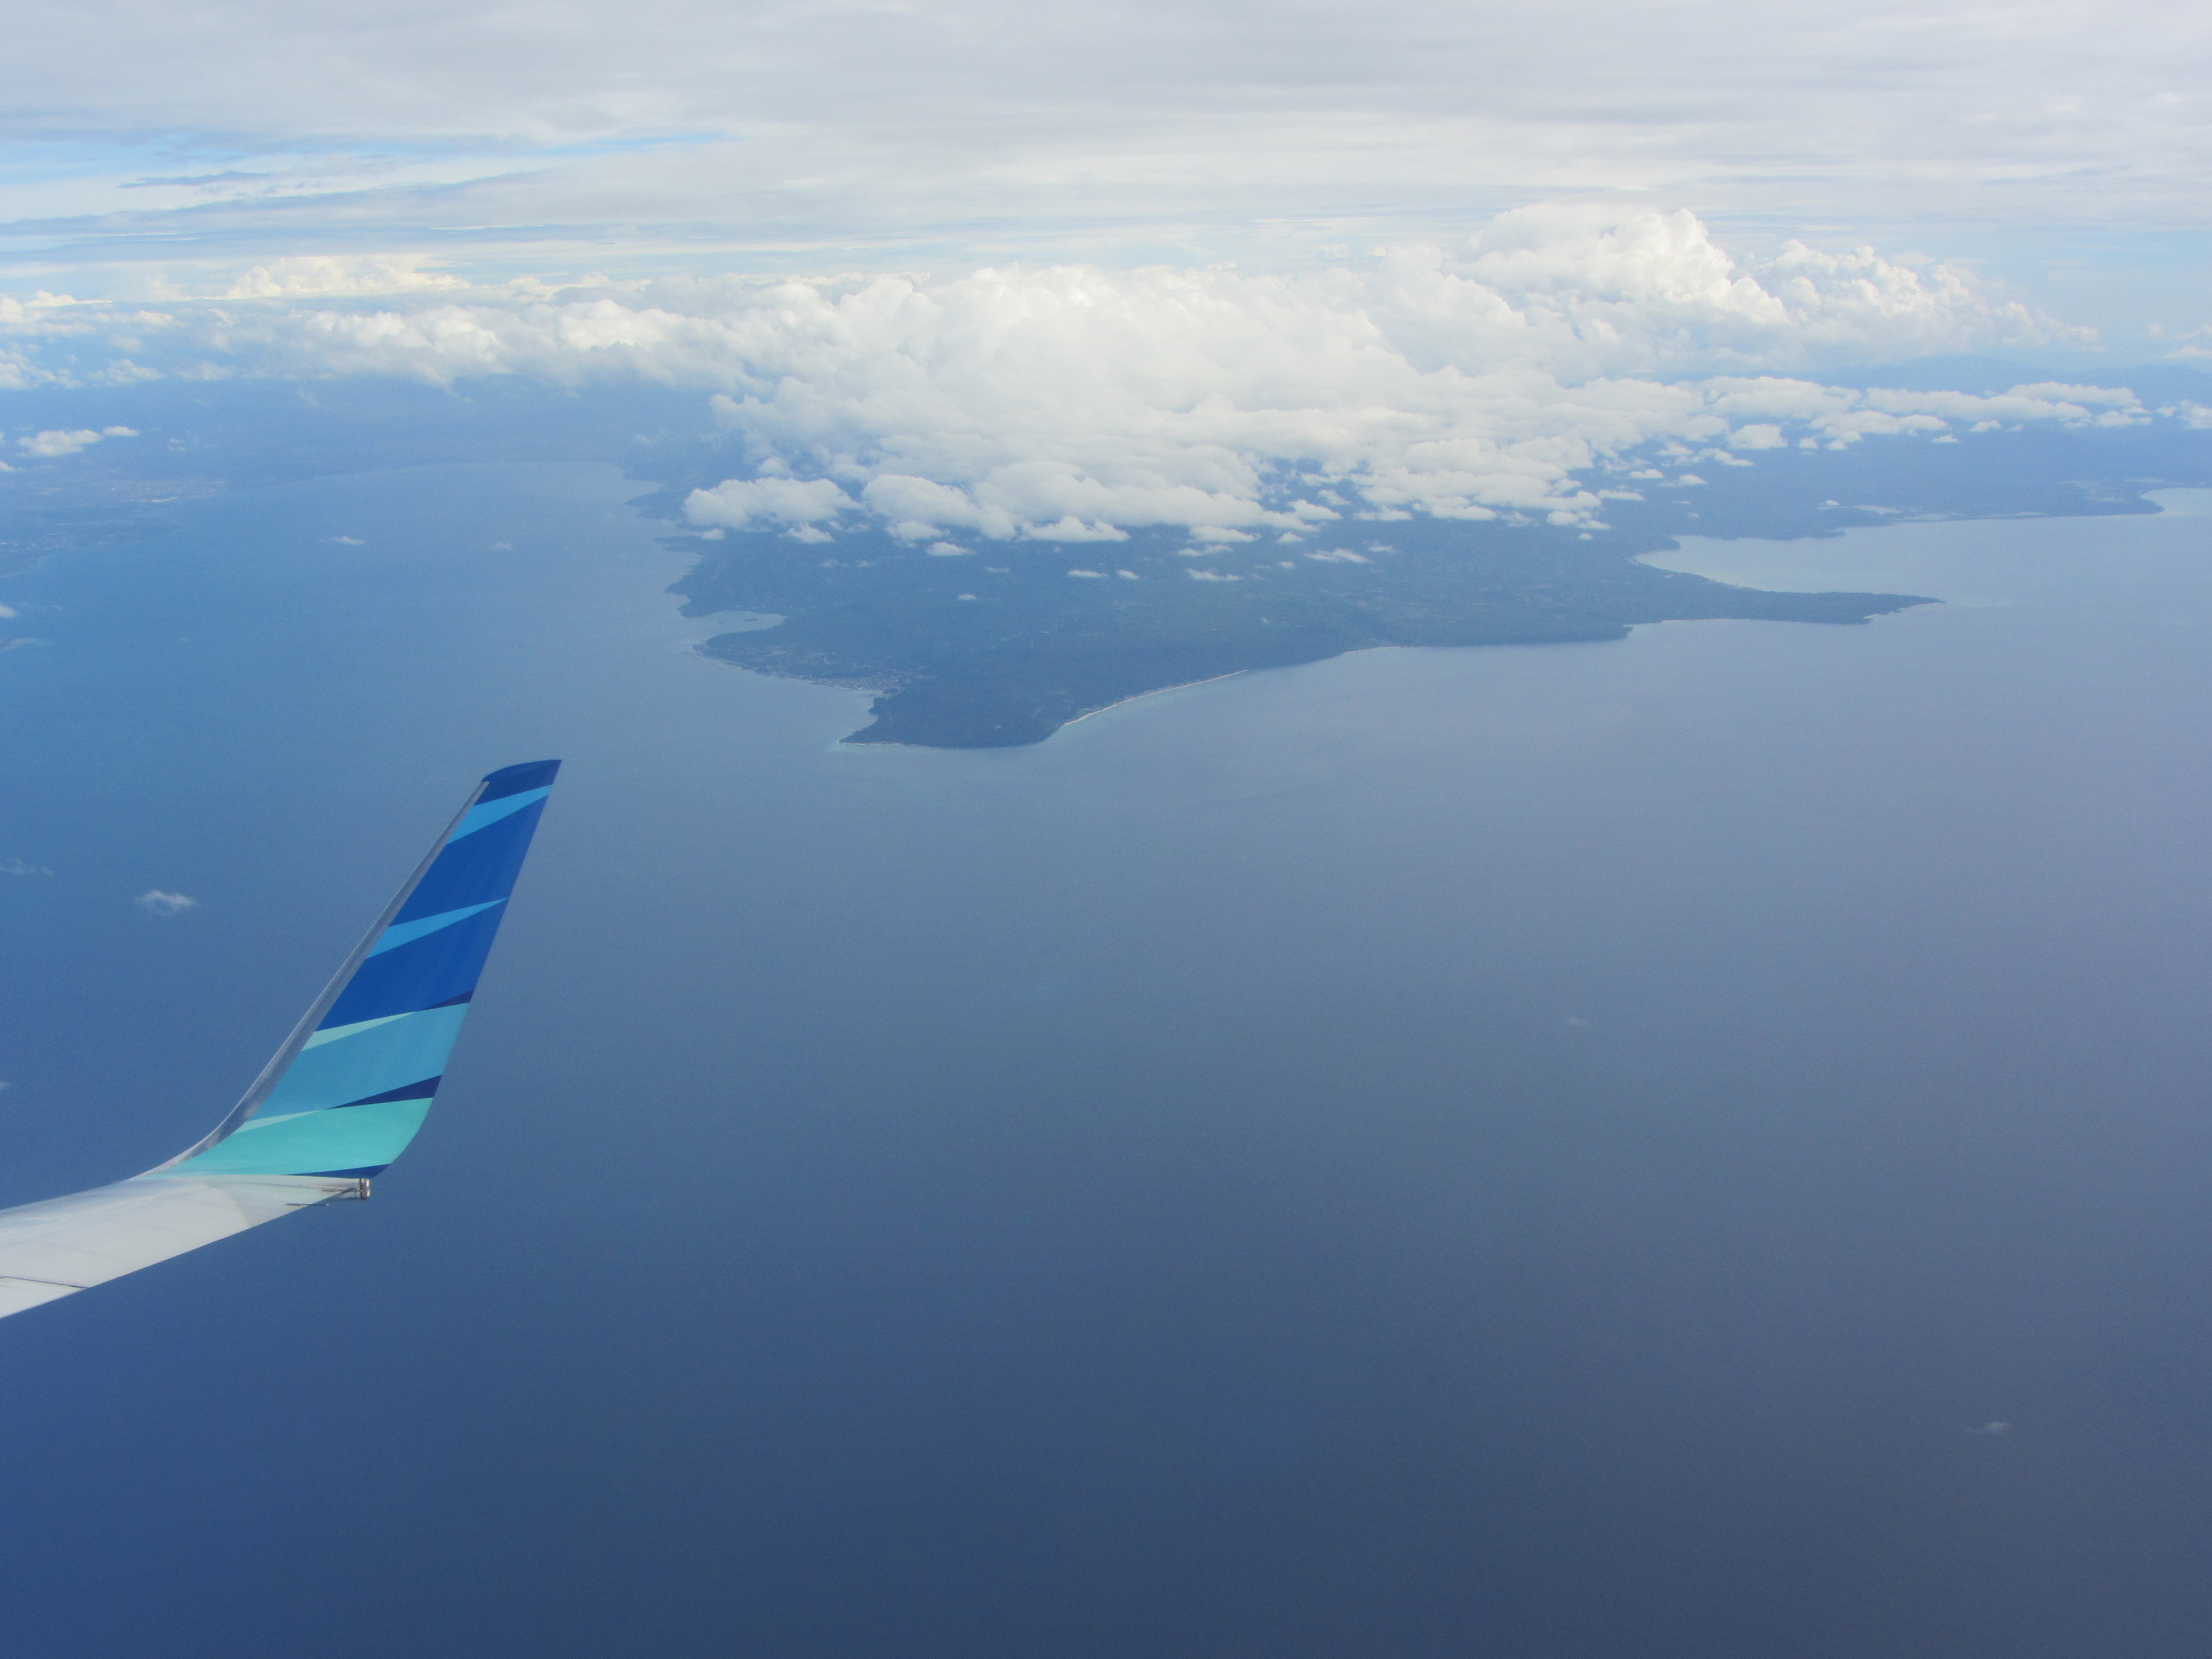 A aerial view of the tip of the western peninsula of Donggala District. Palu Bay to the left and the Malacca Straits to the right.